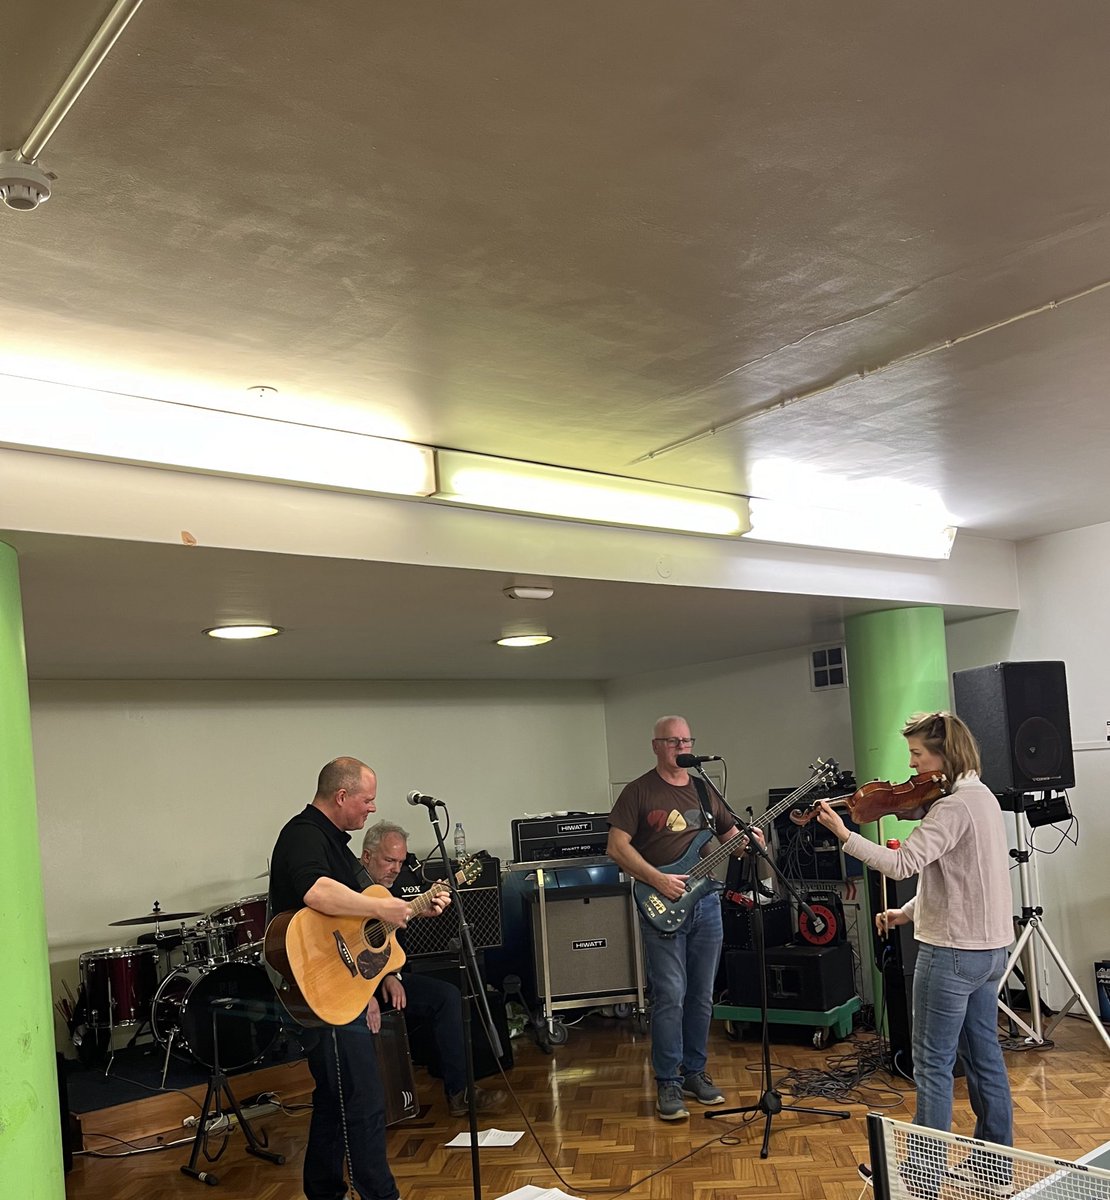 Great to catch up with @nowak_paul and his band in rehearsal for our @the_betsey show on 19th May. It’s going to be great! Tickets at wegottickets.com/event/607820